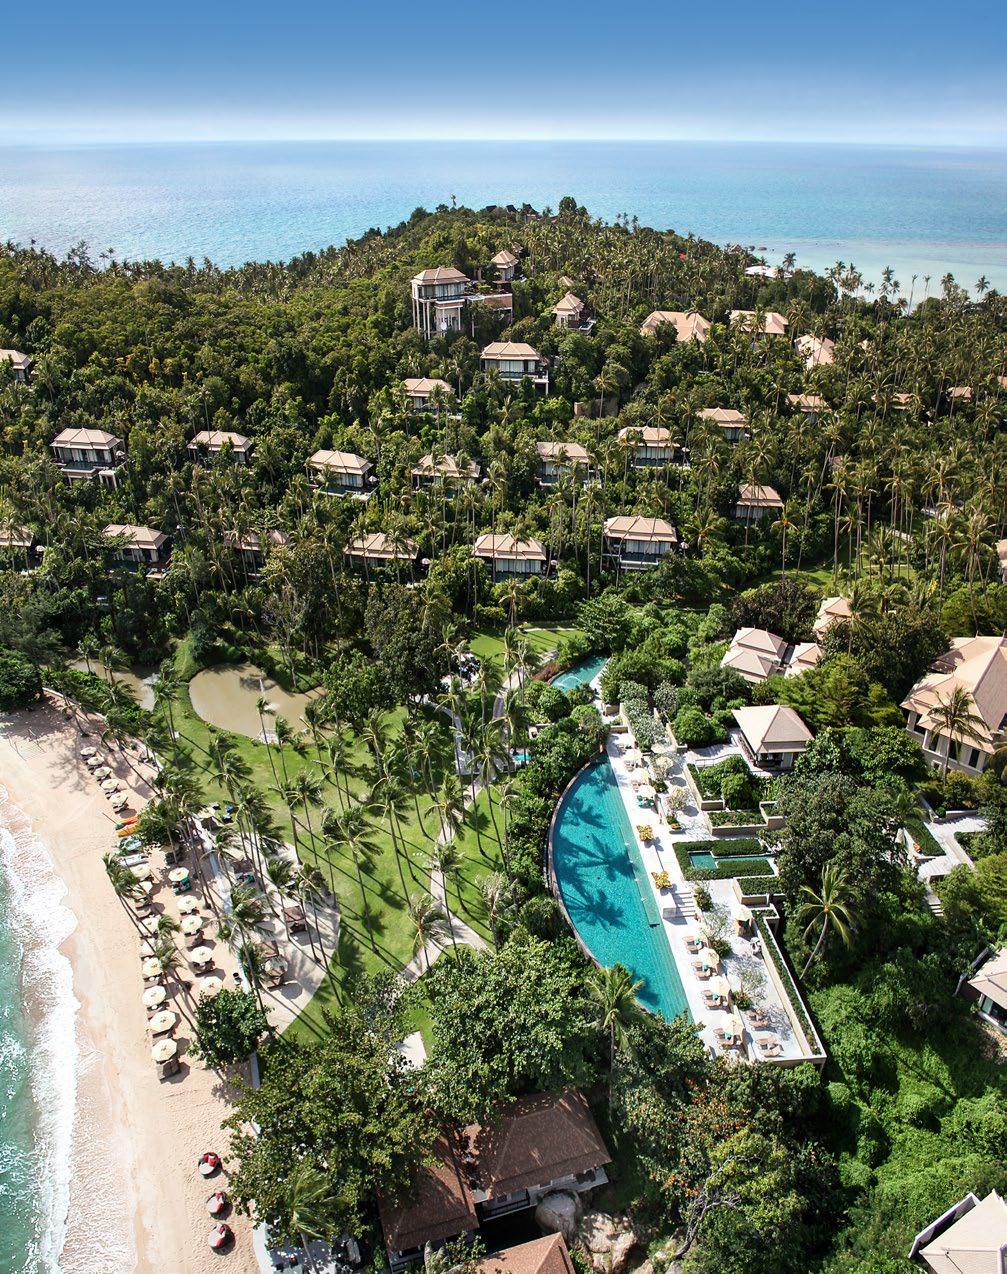 WELCOME TO BANYAN TREE Located 19km from Samui International Airport on the south-eastern coast of the island, Banyan Tree Samui is nestled in a series of cascading terraces on a private hill cove